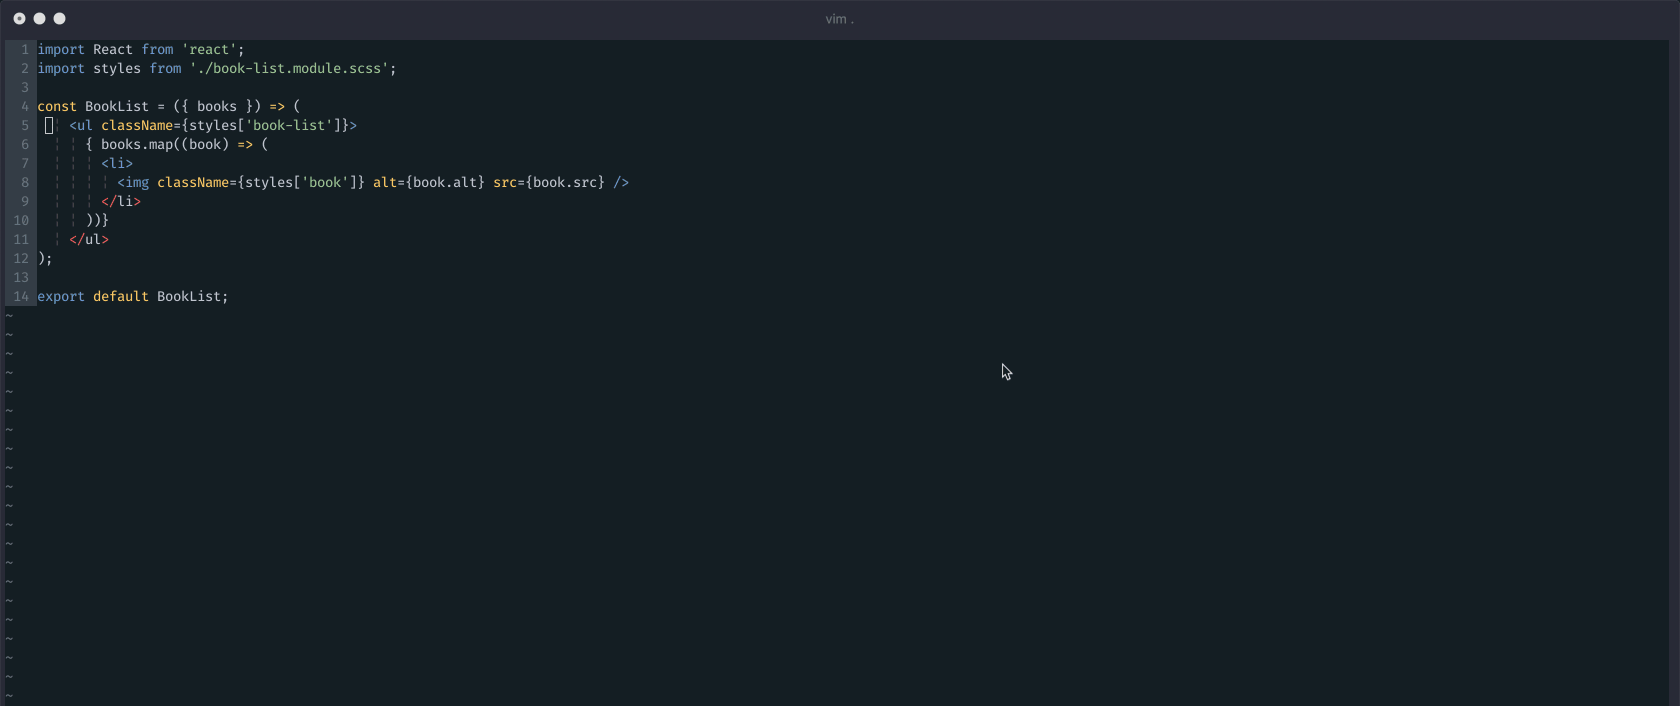 Open Commit from Vim